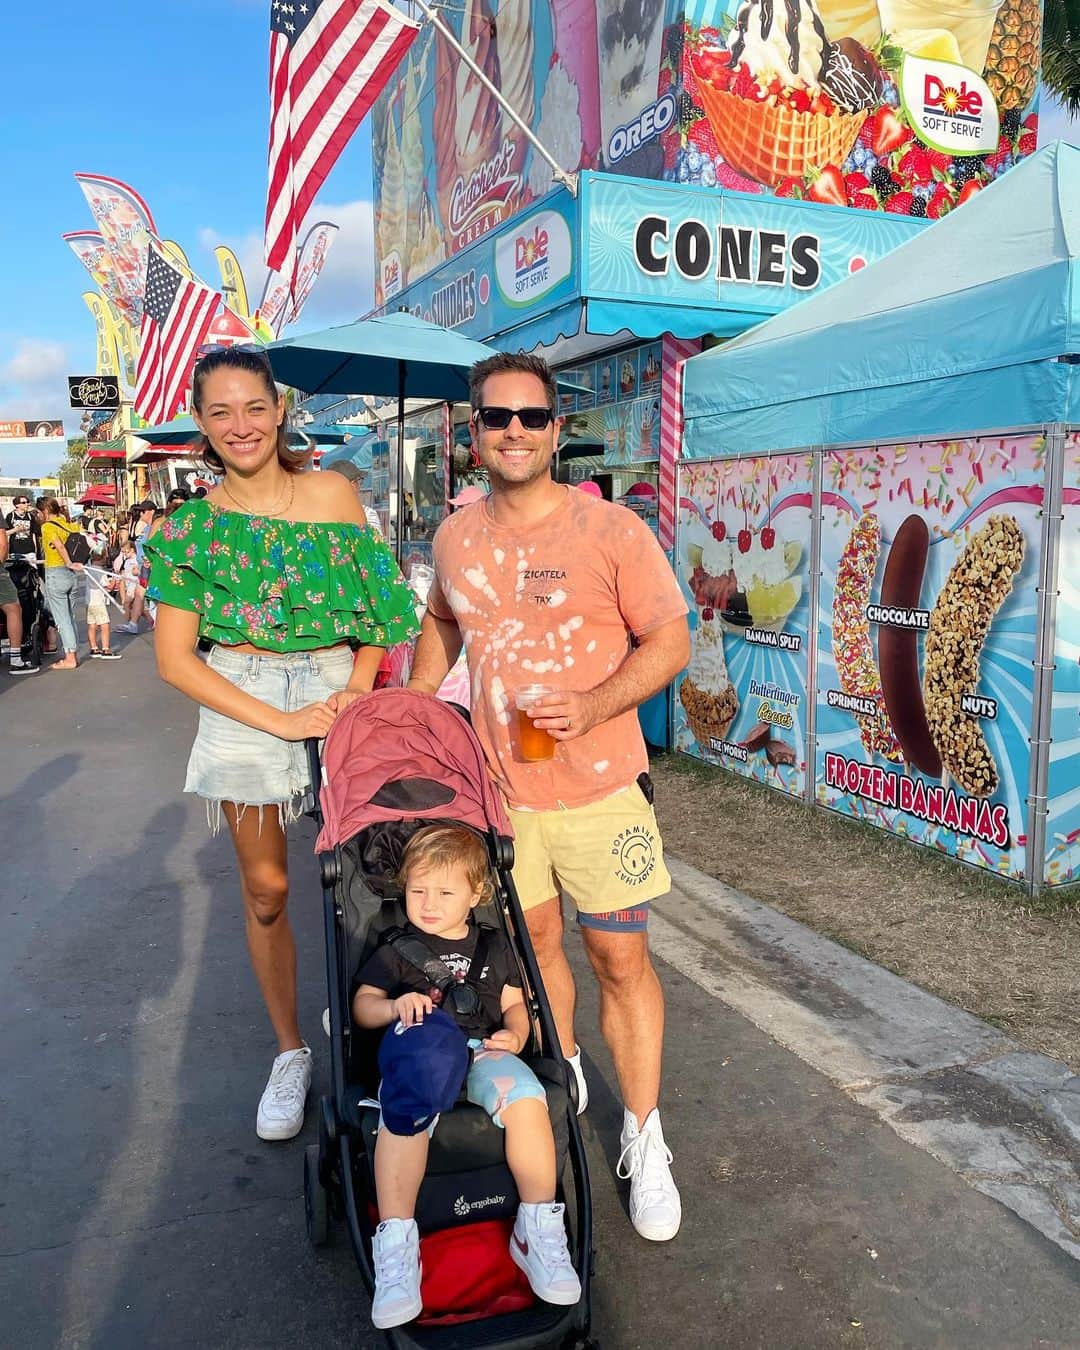 Samuel Lippkeのインスタグラム：「OC fair last night with the fam. Felt like old times but now with a little different approach and set up. Penelope loved it and I even got a thrill ride in myself. Now to detox from allll the food we decided to eat. Hamburger, ribs, wings, fries, milkshake, pizza & beer. Auggghhh I felt so gross last night haha back to the healthy diet. But memories were made 🎡🎠🎢🎟️🦄😝 #ocfair #thelippkes」